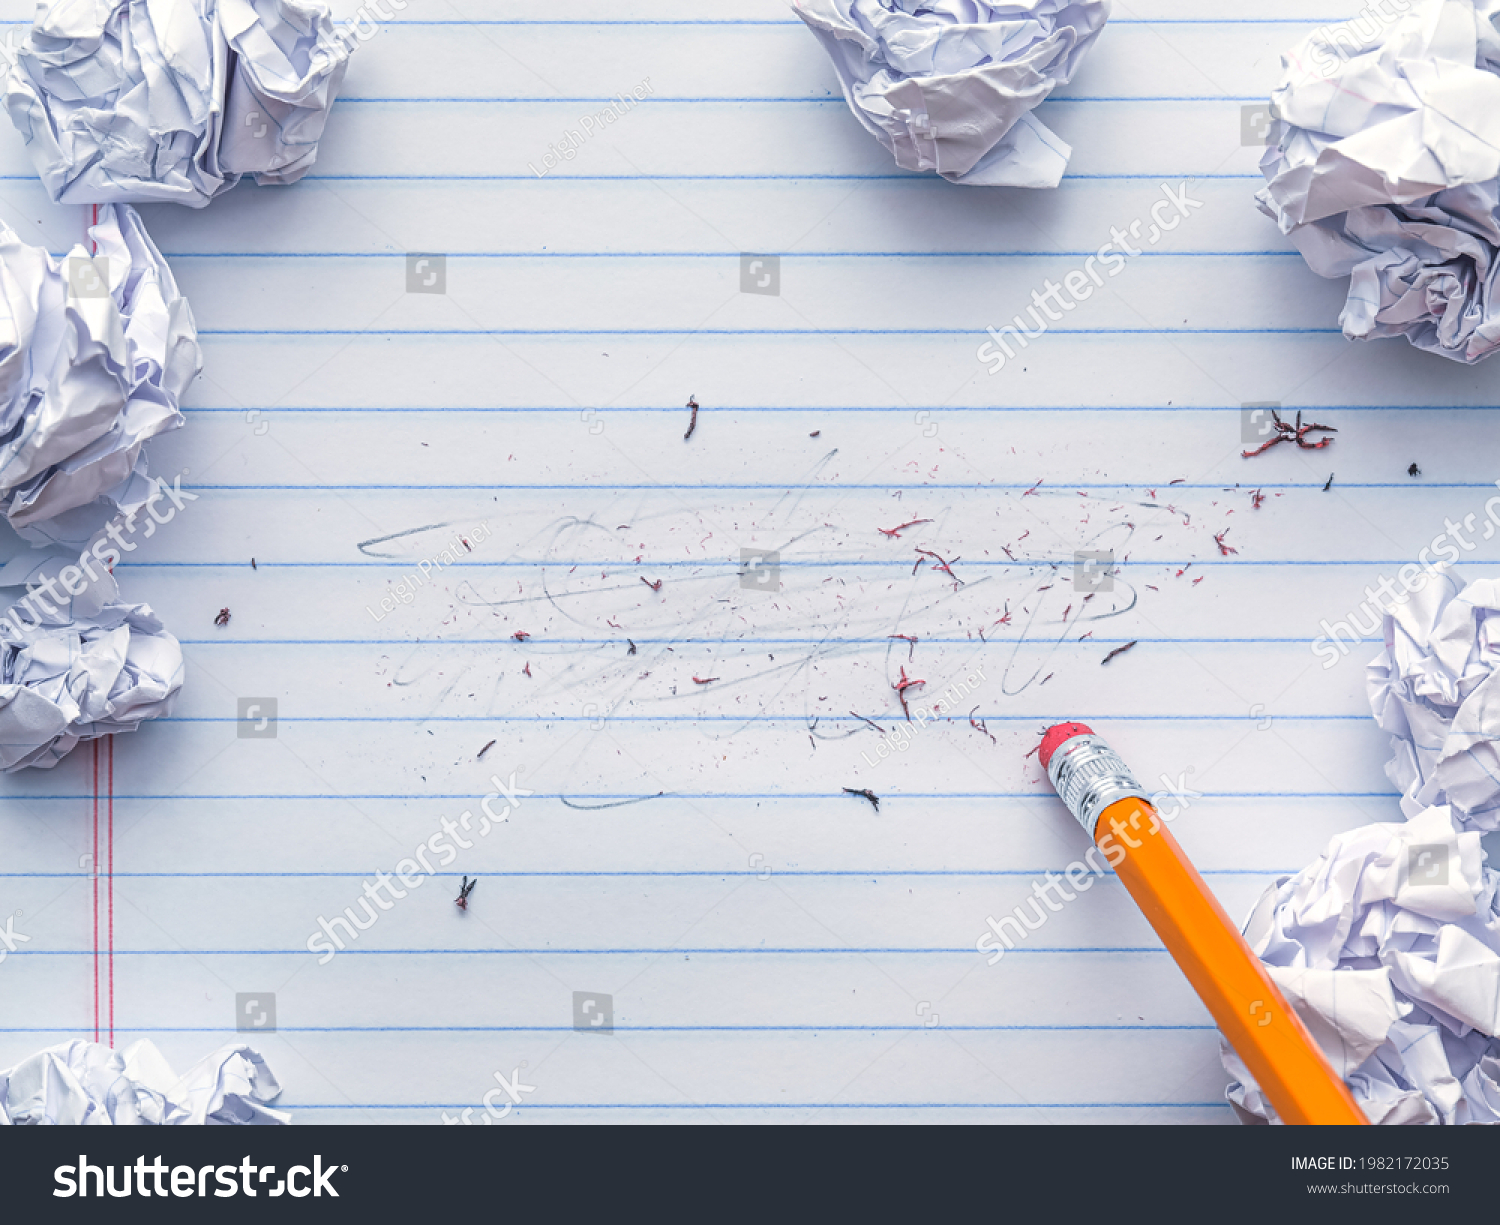 School supplies of blank lined notebook paper with eraser marks and erased pencil writing, surrounded by balled up paper and a pencil eraser. Studying or writing mistakes concept. #1982172035